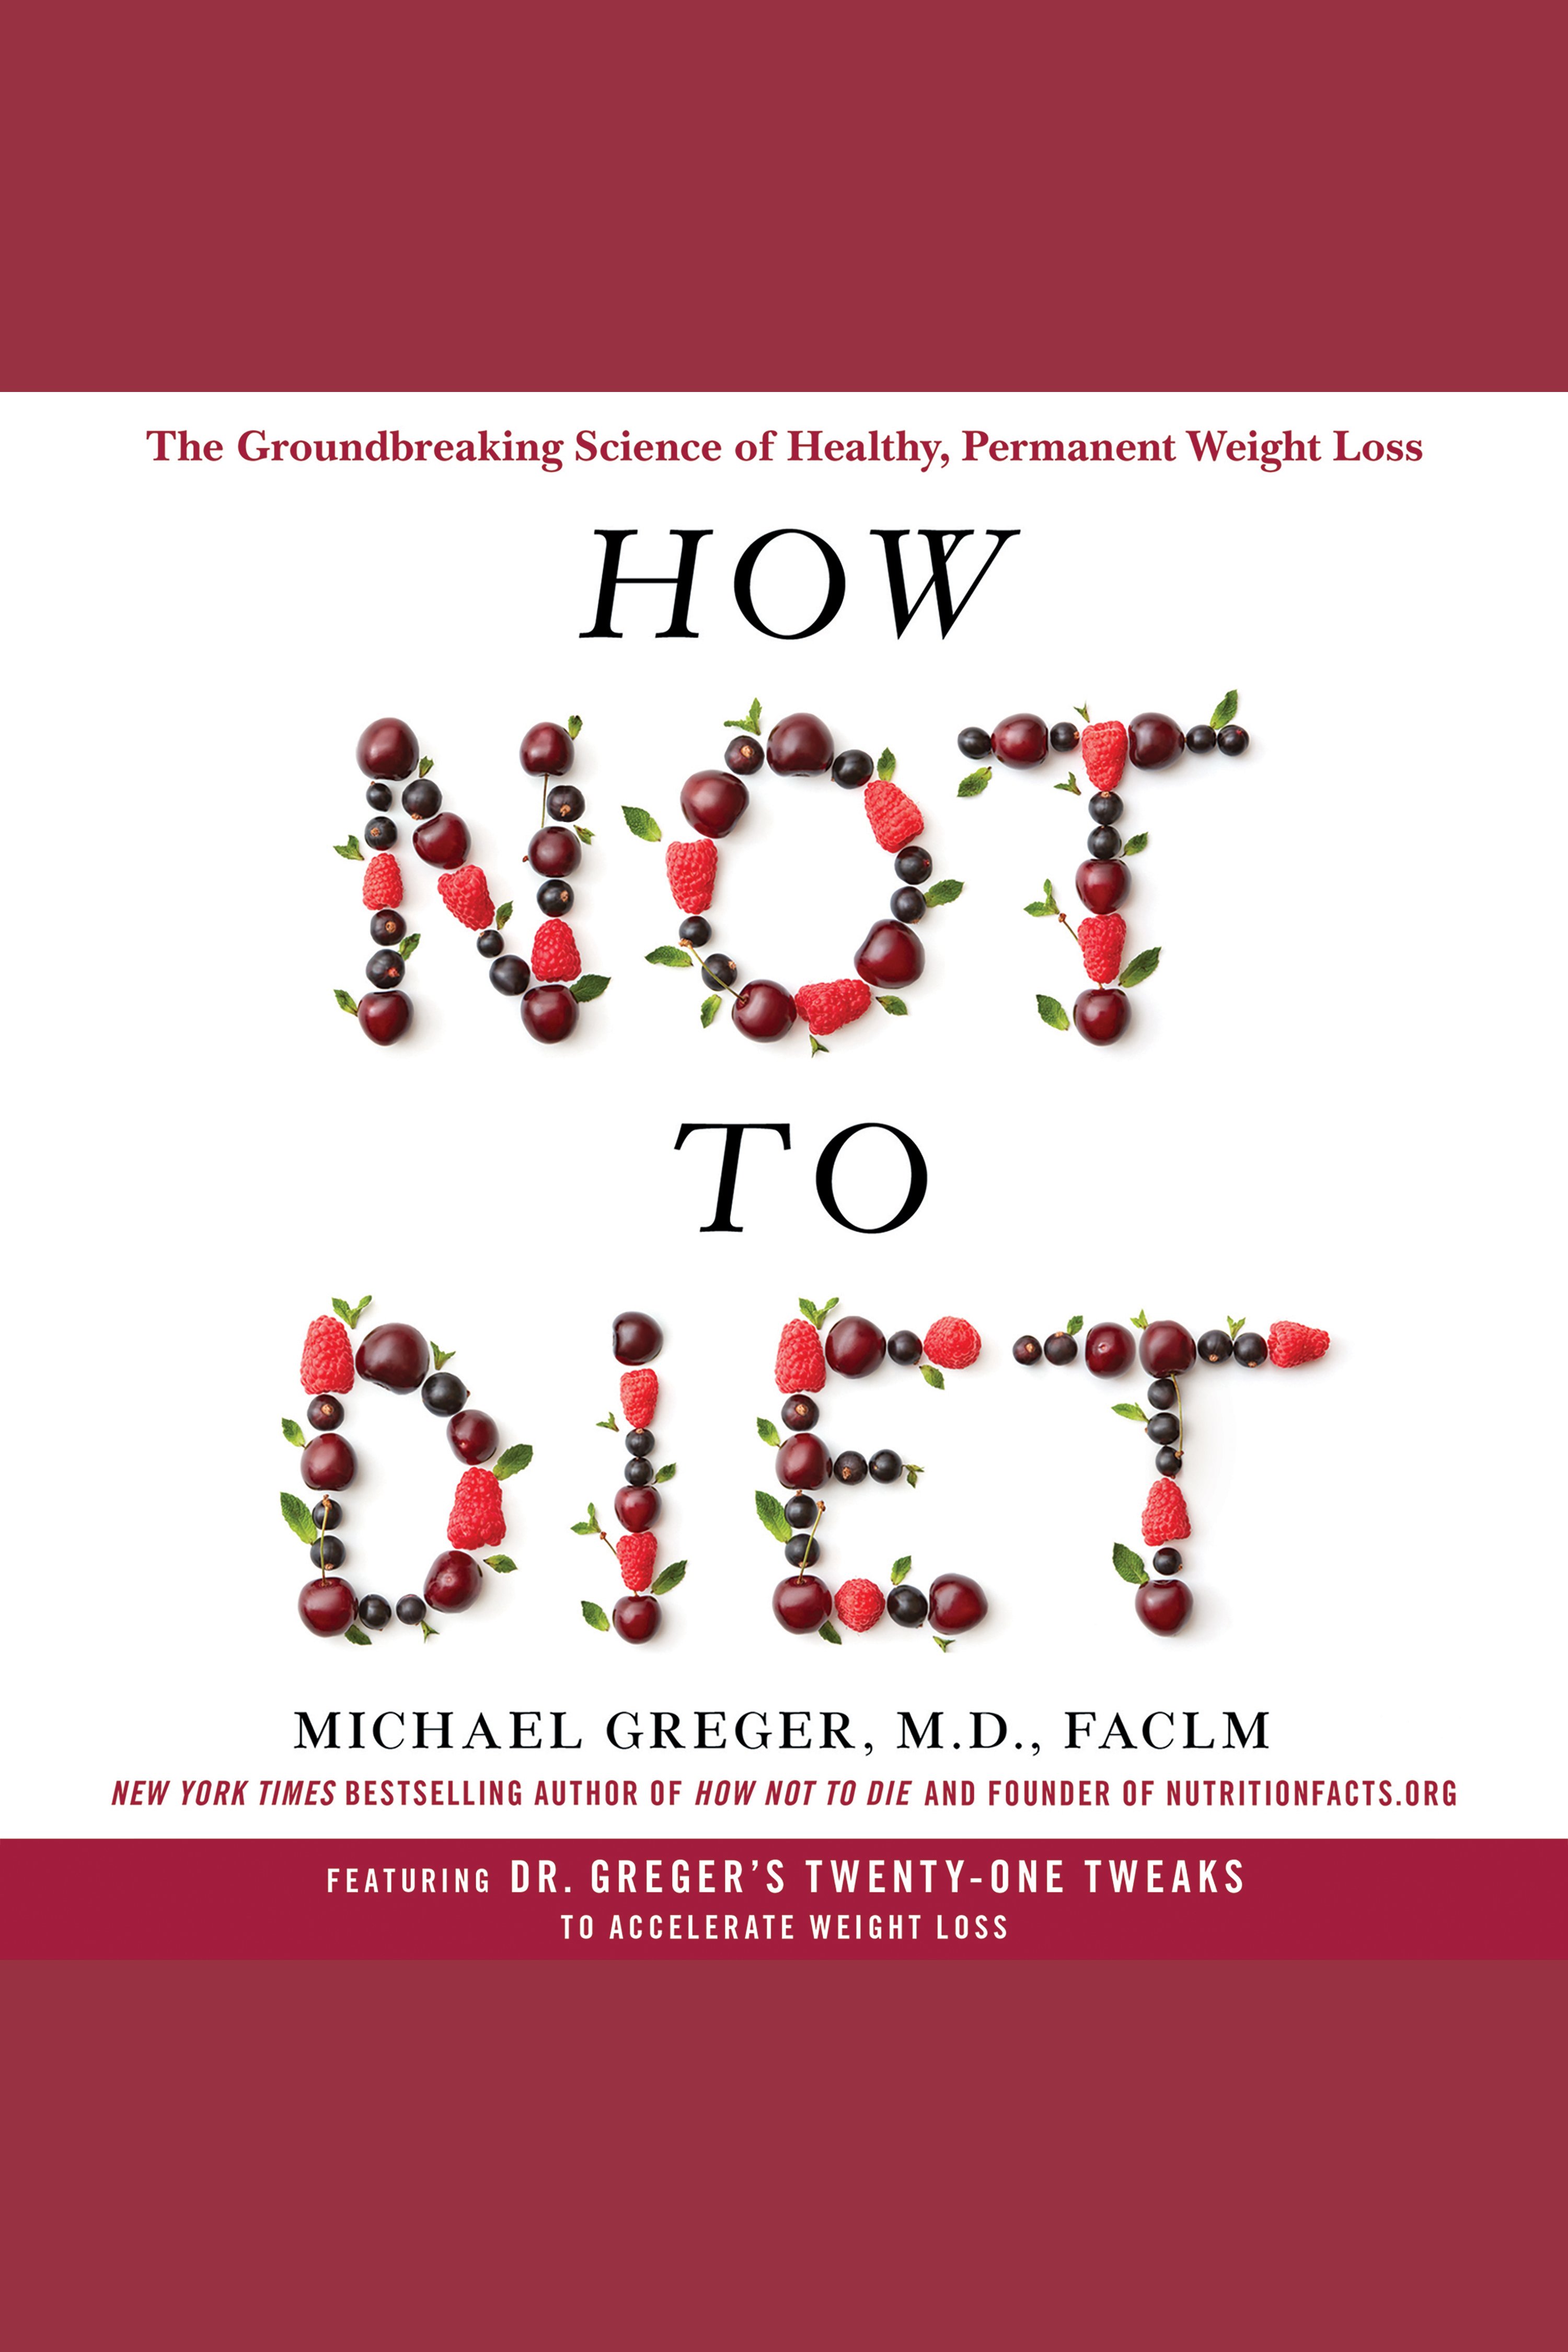 How not to diet the groundbreaking science of healthy, permanent weight loss cover image